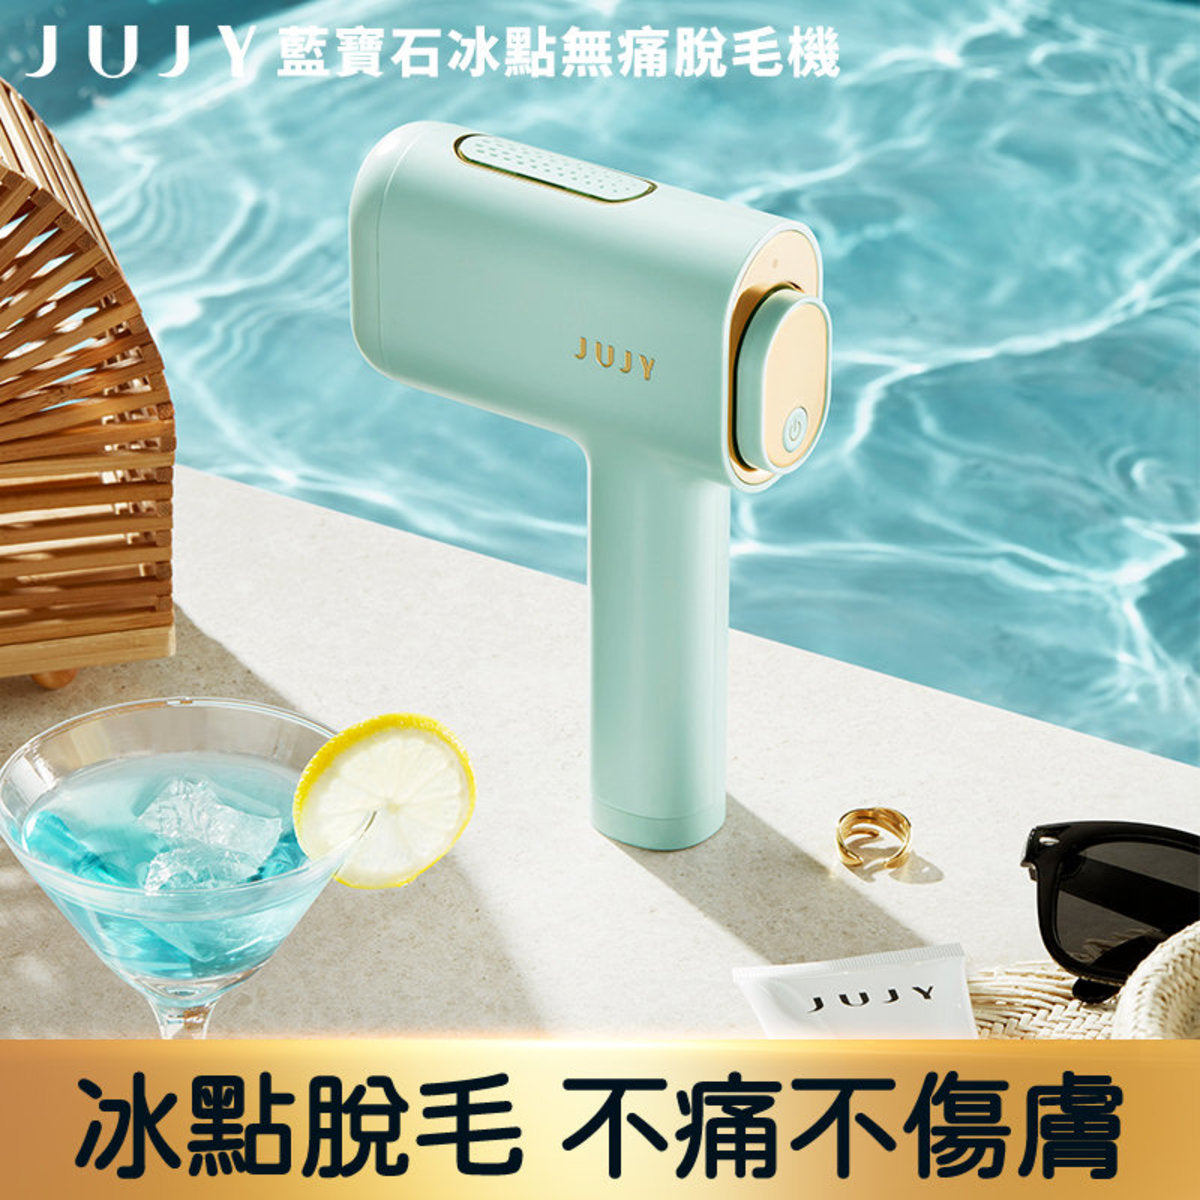 Jujy - Sapphire Freezing Point Painless Hair Removal Machine｜Household Hair Removal Machine｜IPL Colored Light Technology｜Synchronized Ice Removal｜Full Body Hair Removal